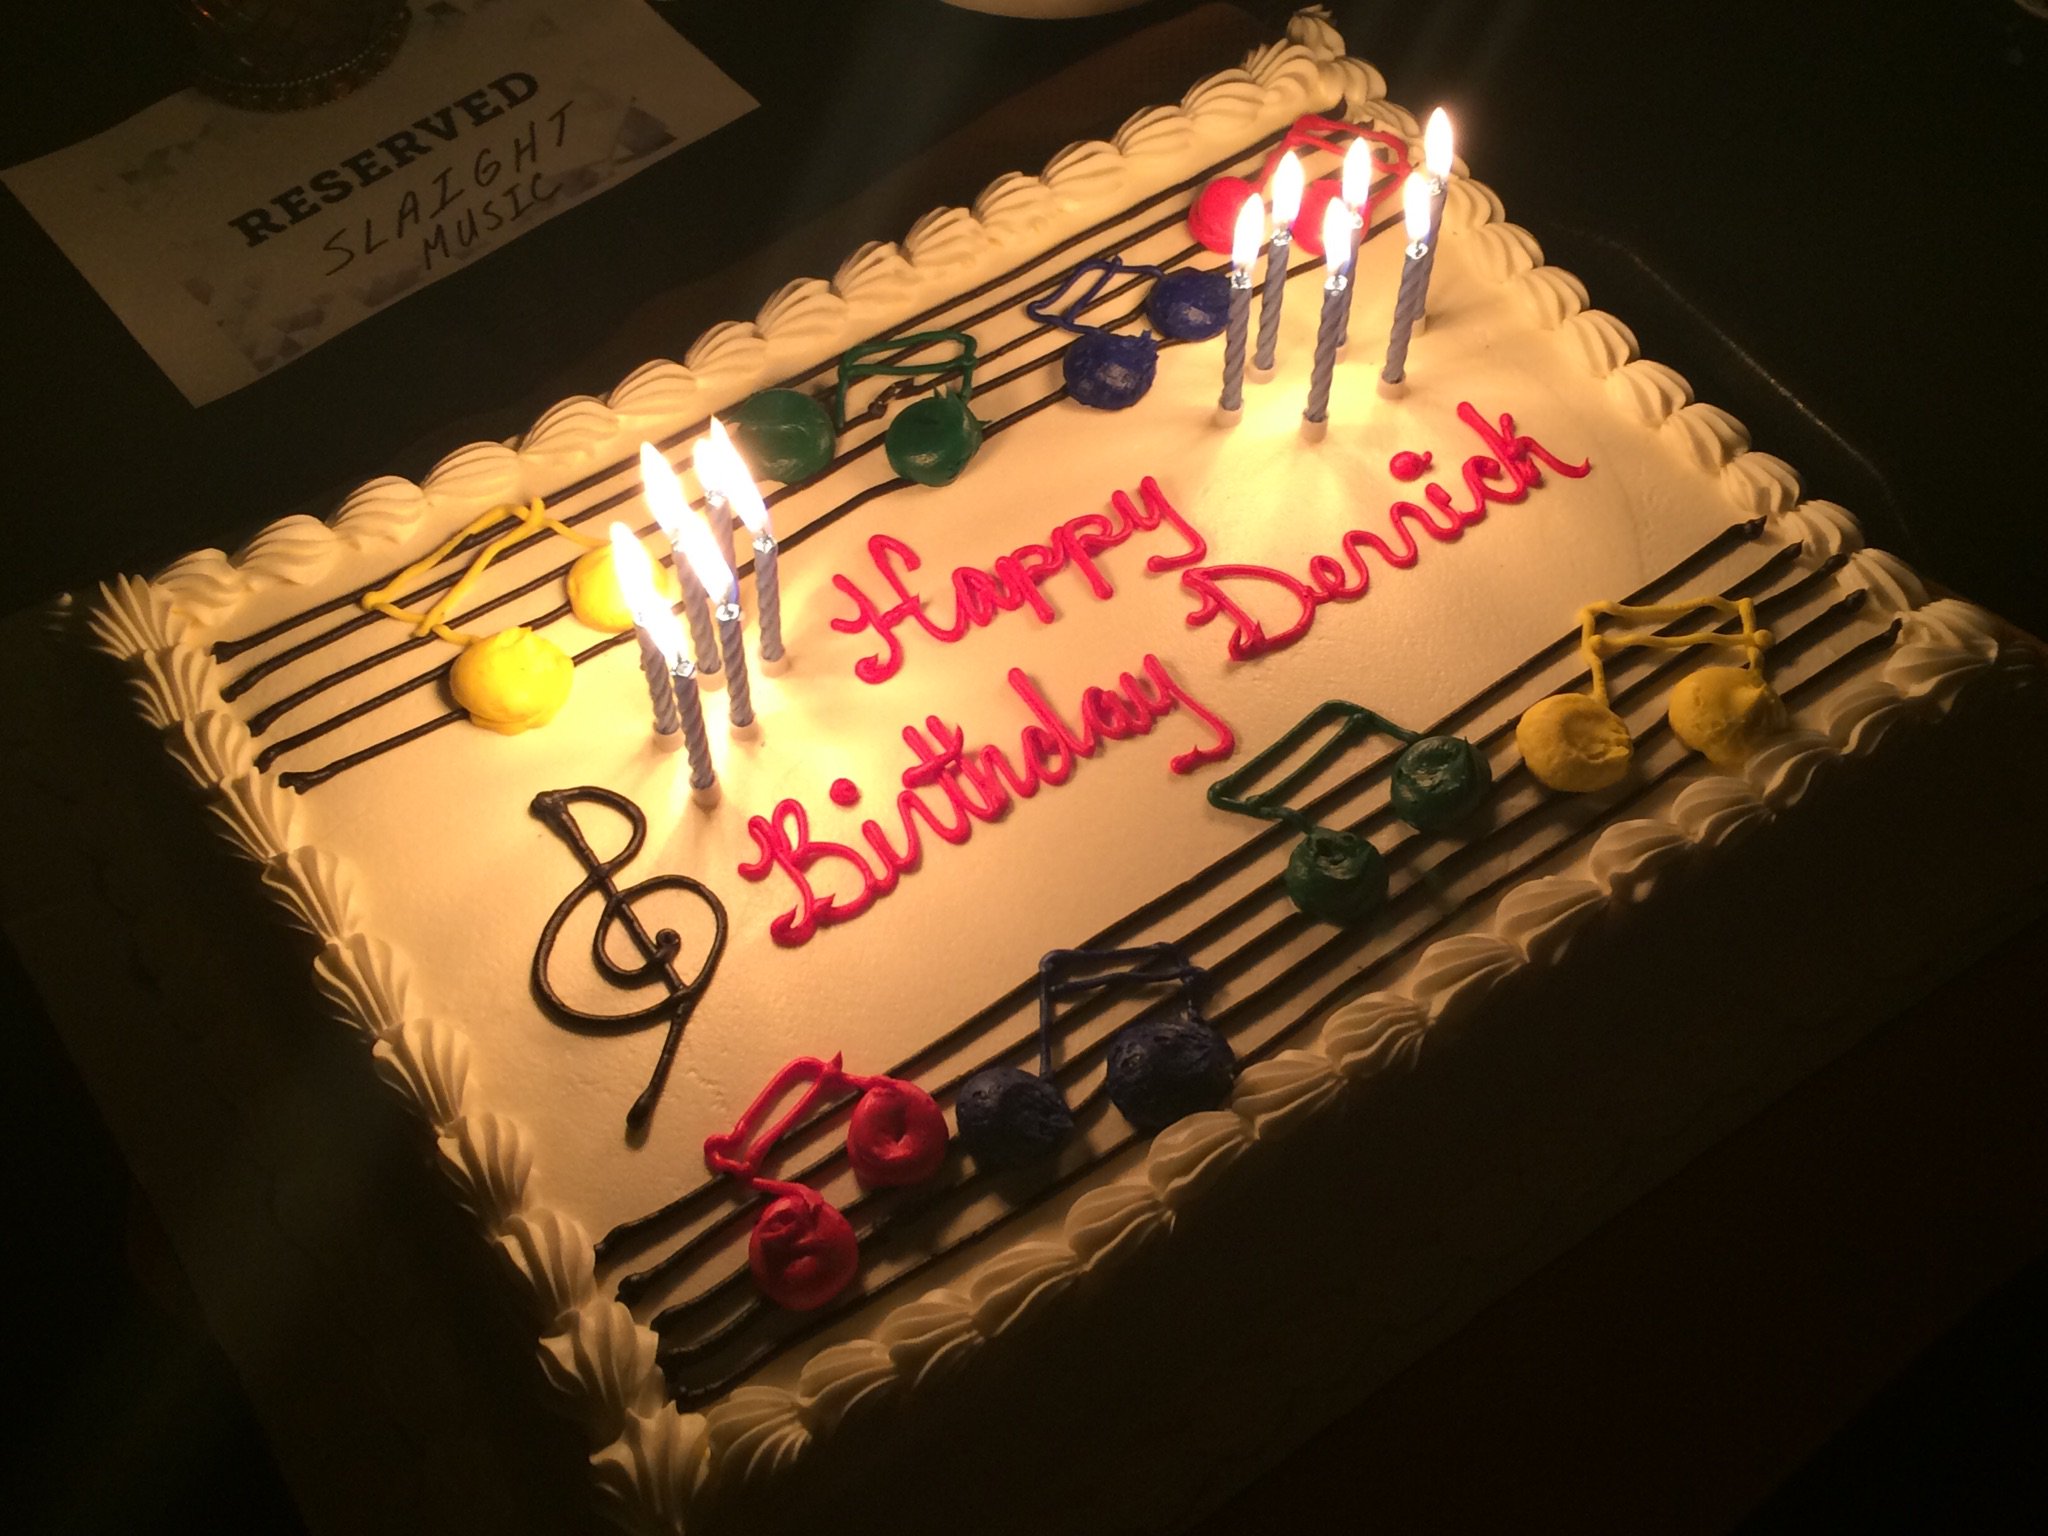 You all sung Happy Birthday to Derrick Ross of first thing, but we brought the cake! 